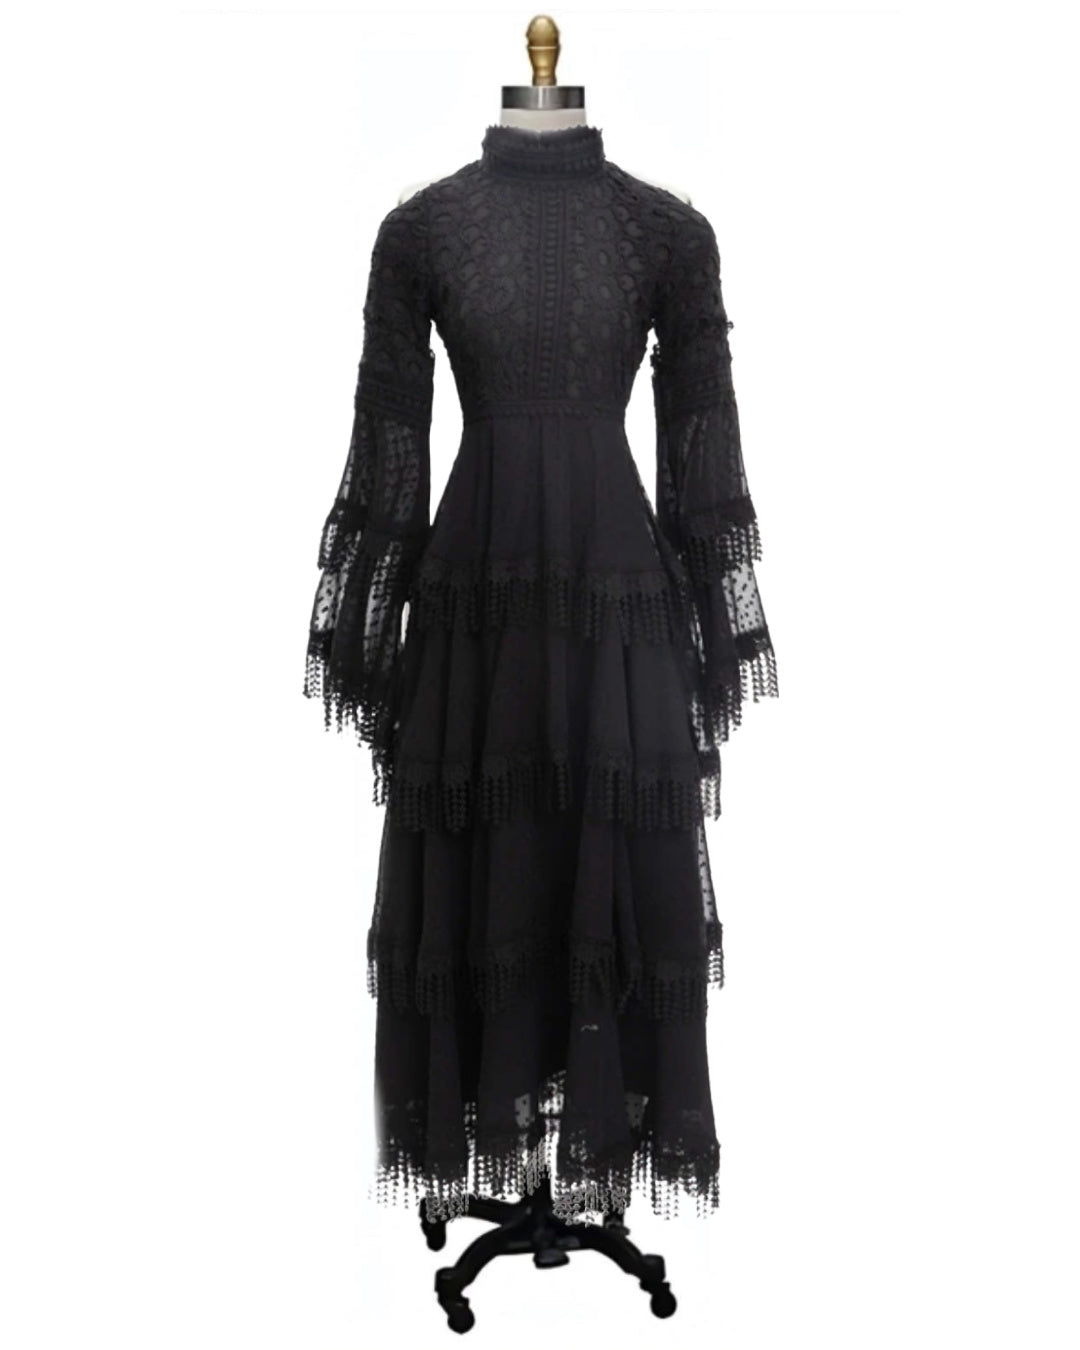 Morticia- the Victorian Style Elegant Black Lace Long Sleeved Gothic Dress (2 Colors)